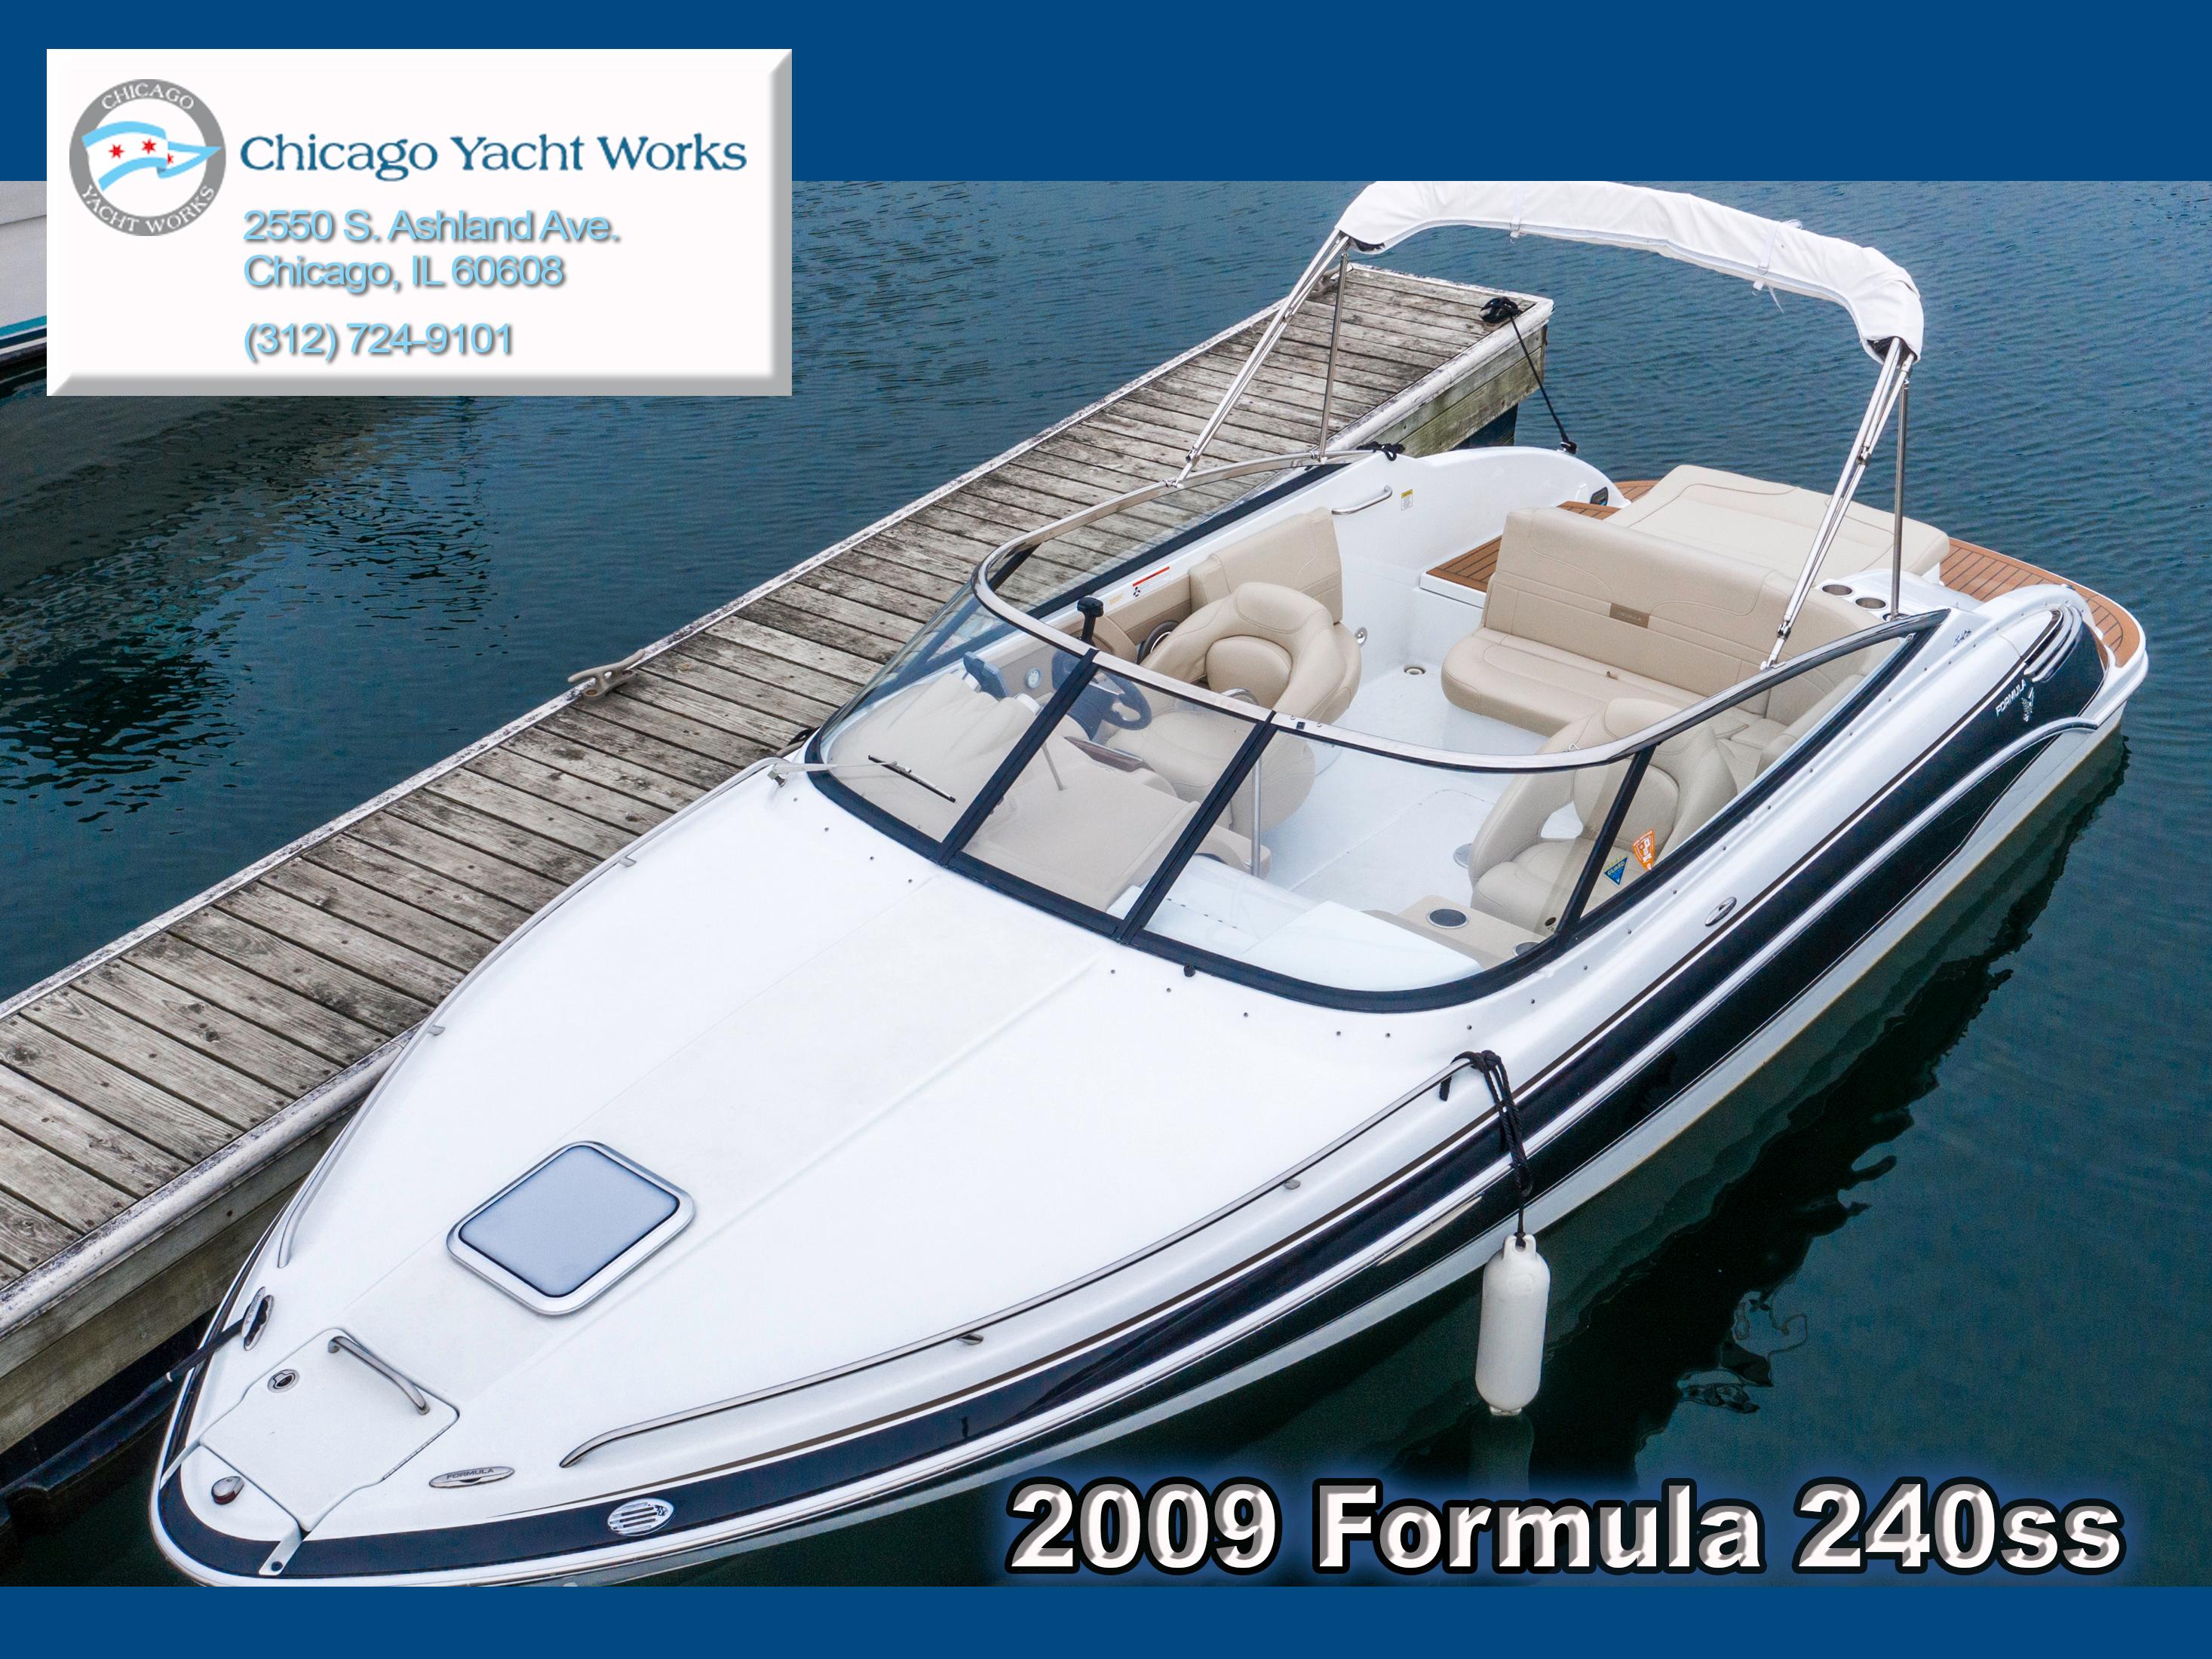 chicago yacht works reviews